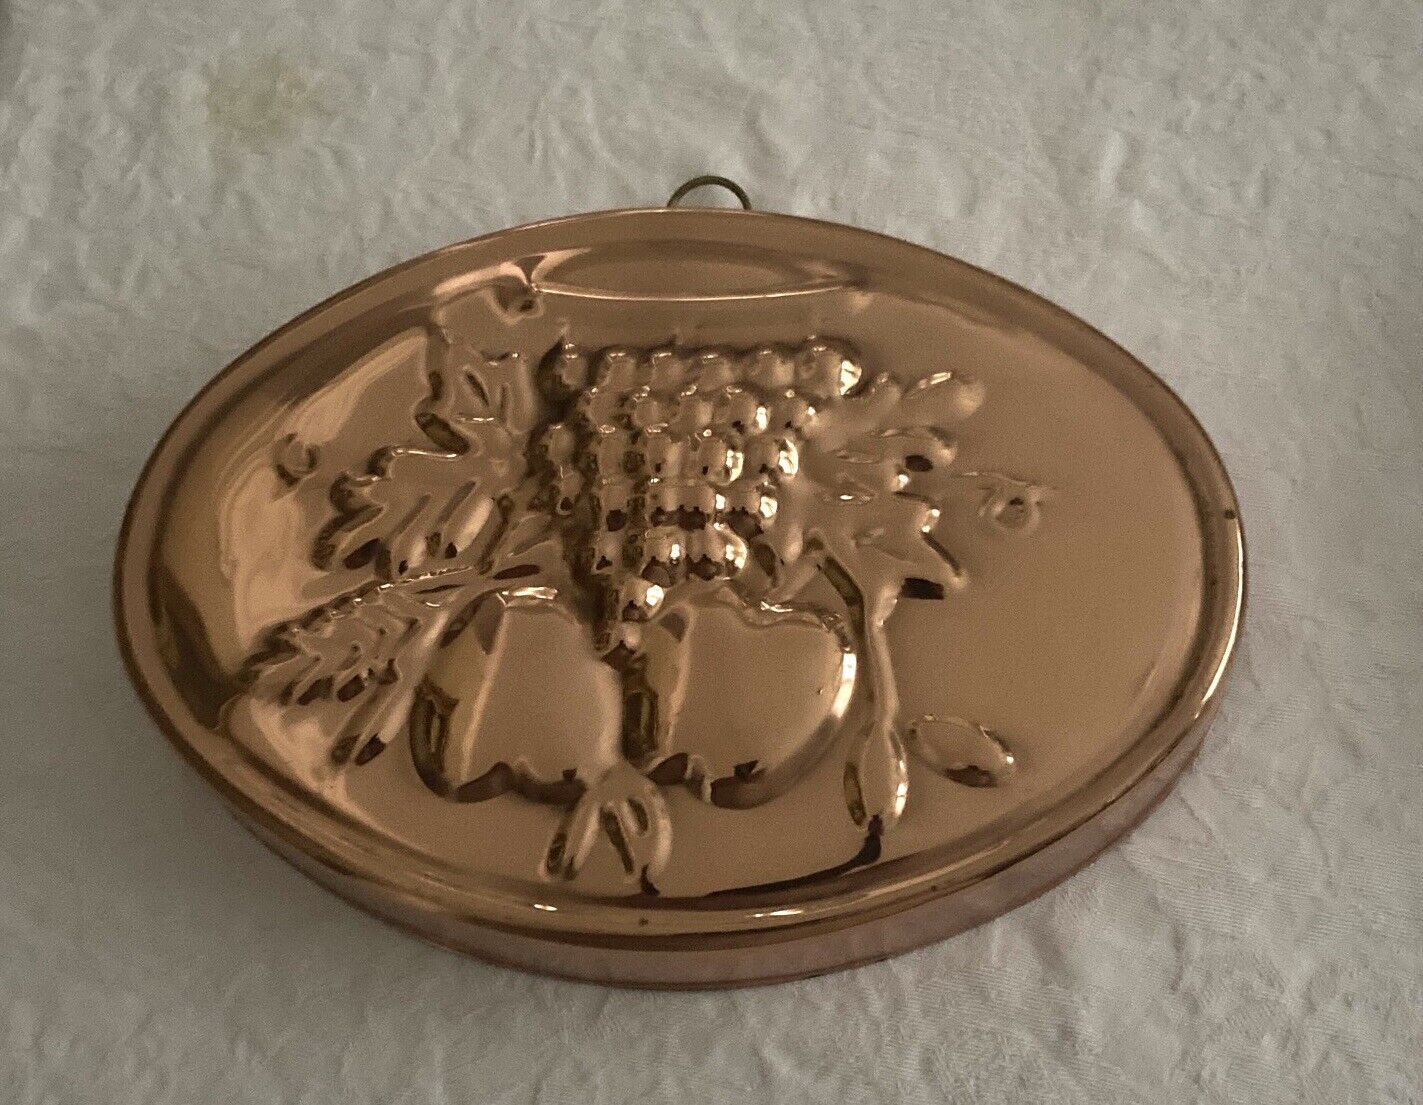 Decorative Copper Mold Wall Hanging Oval  Shape Fruit Design Of Apples & Grapes